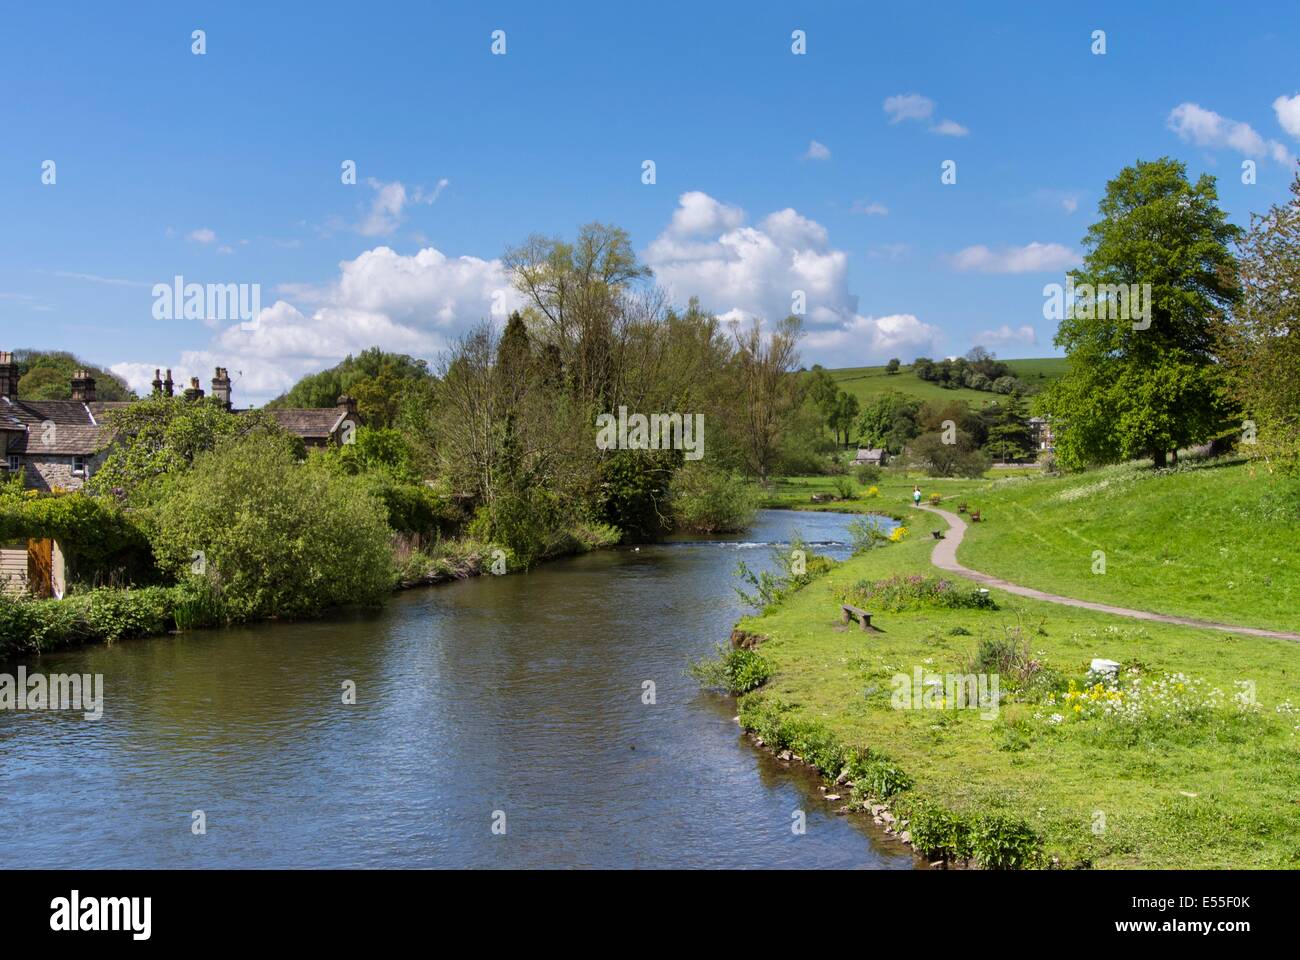 View of the River Wye, showing path through 'Scots garden' Bakewell, Derbyshire, England, May. Stock Photo